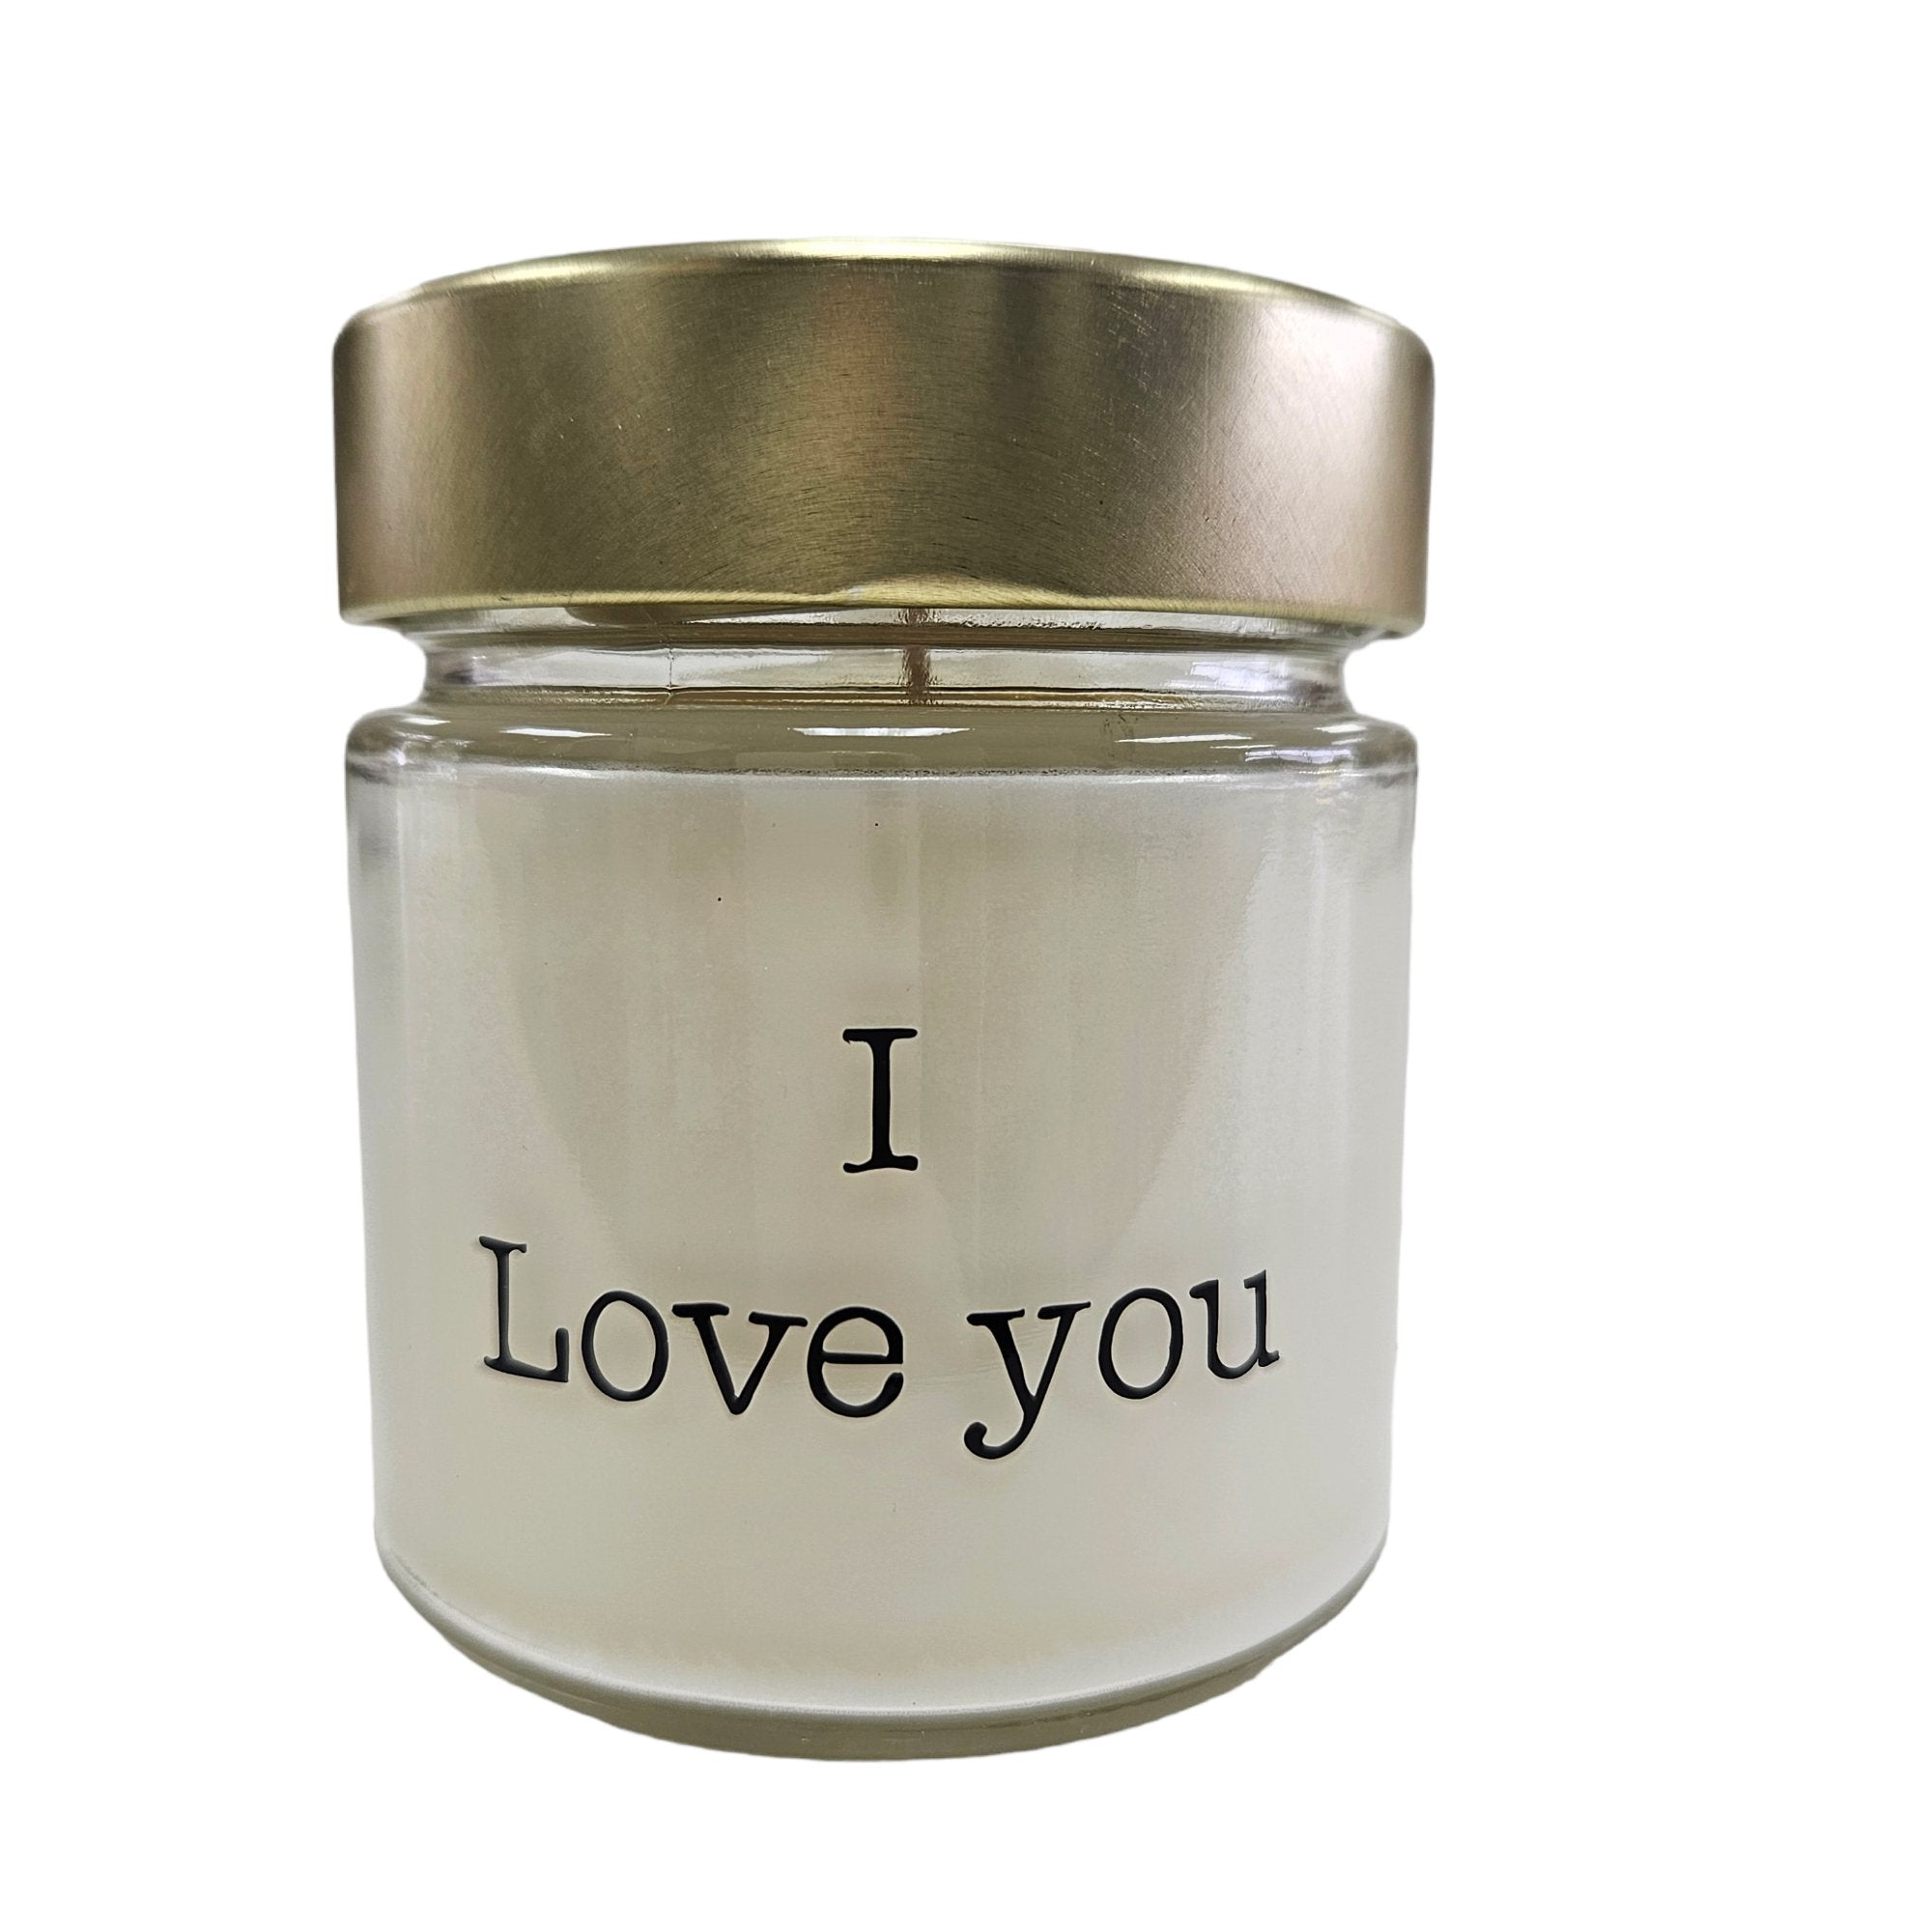 "I love you" candle - Beautiful Gifts